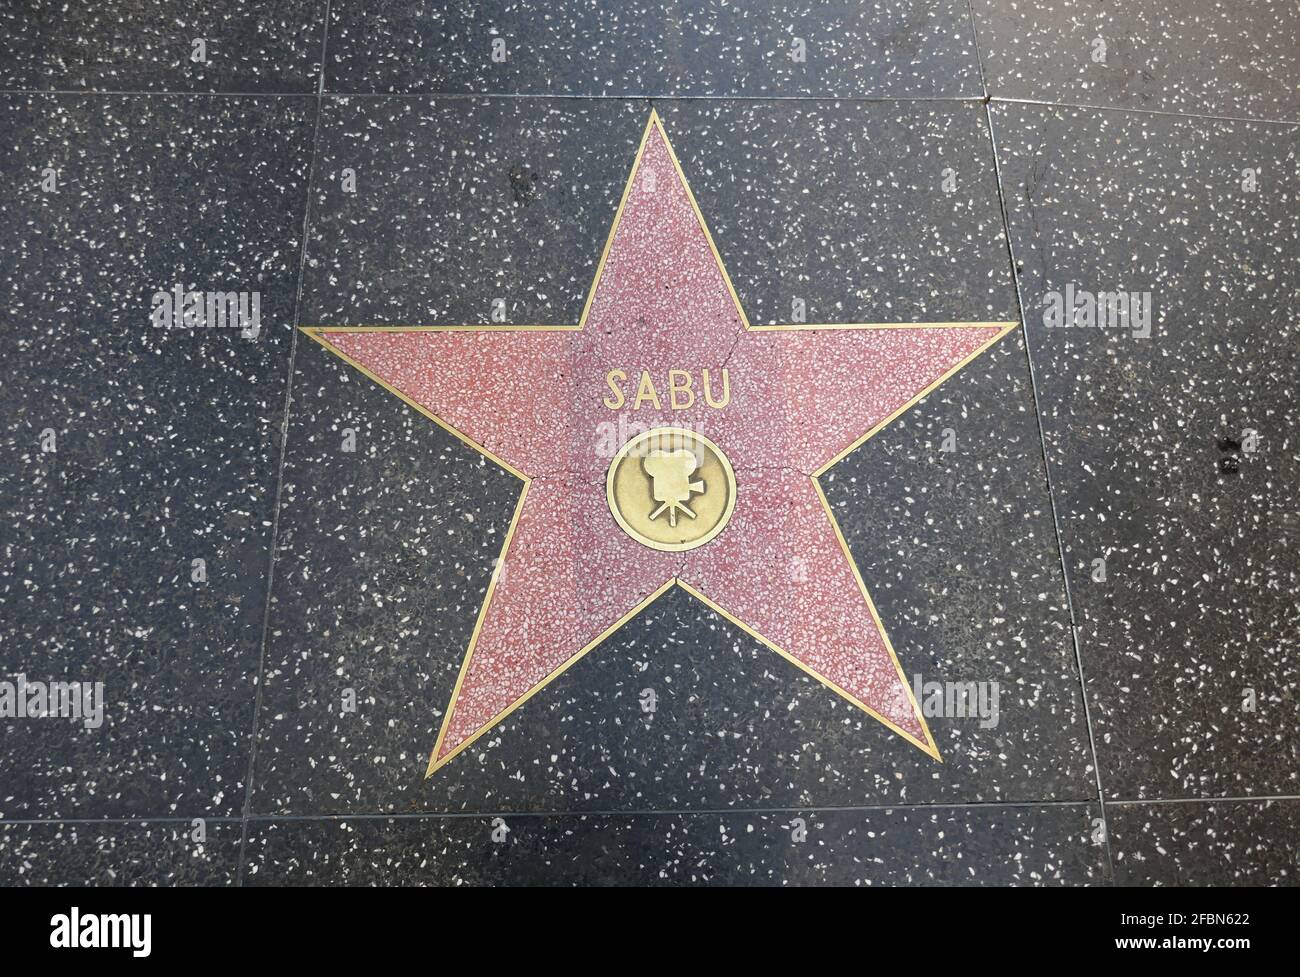 Hollywood, California, USA 17th April 2021 A general view of atmosphere of actor Sabu's Star on the Hollywood Walk of Fame on April 17, 2021 in Hollywood, California, USA. Photo by Barry King/Alamy Stock Photo Stock Photo